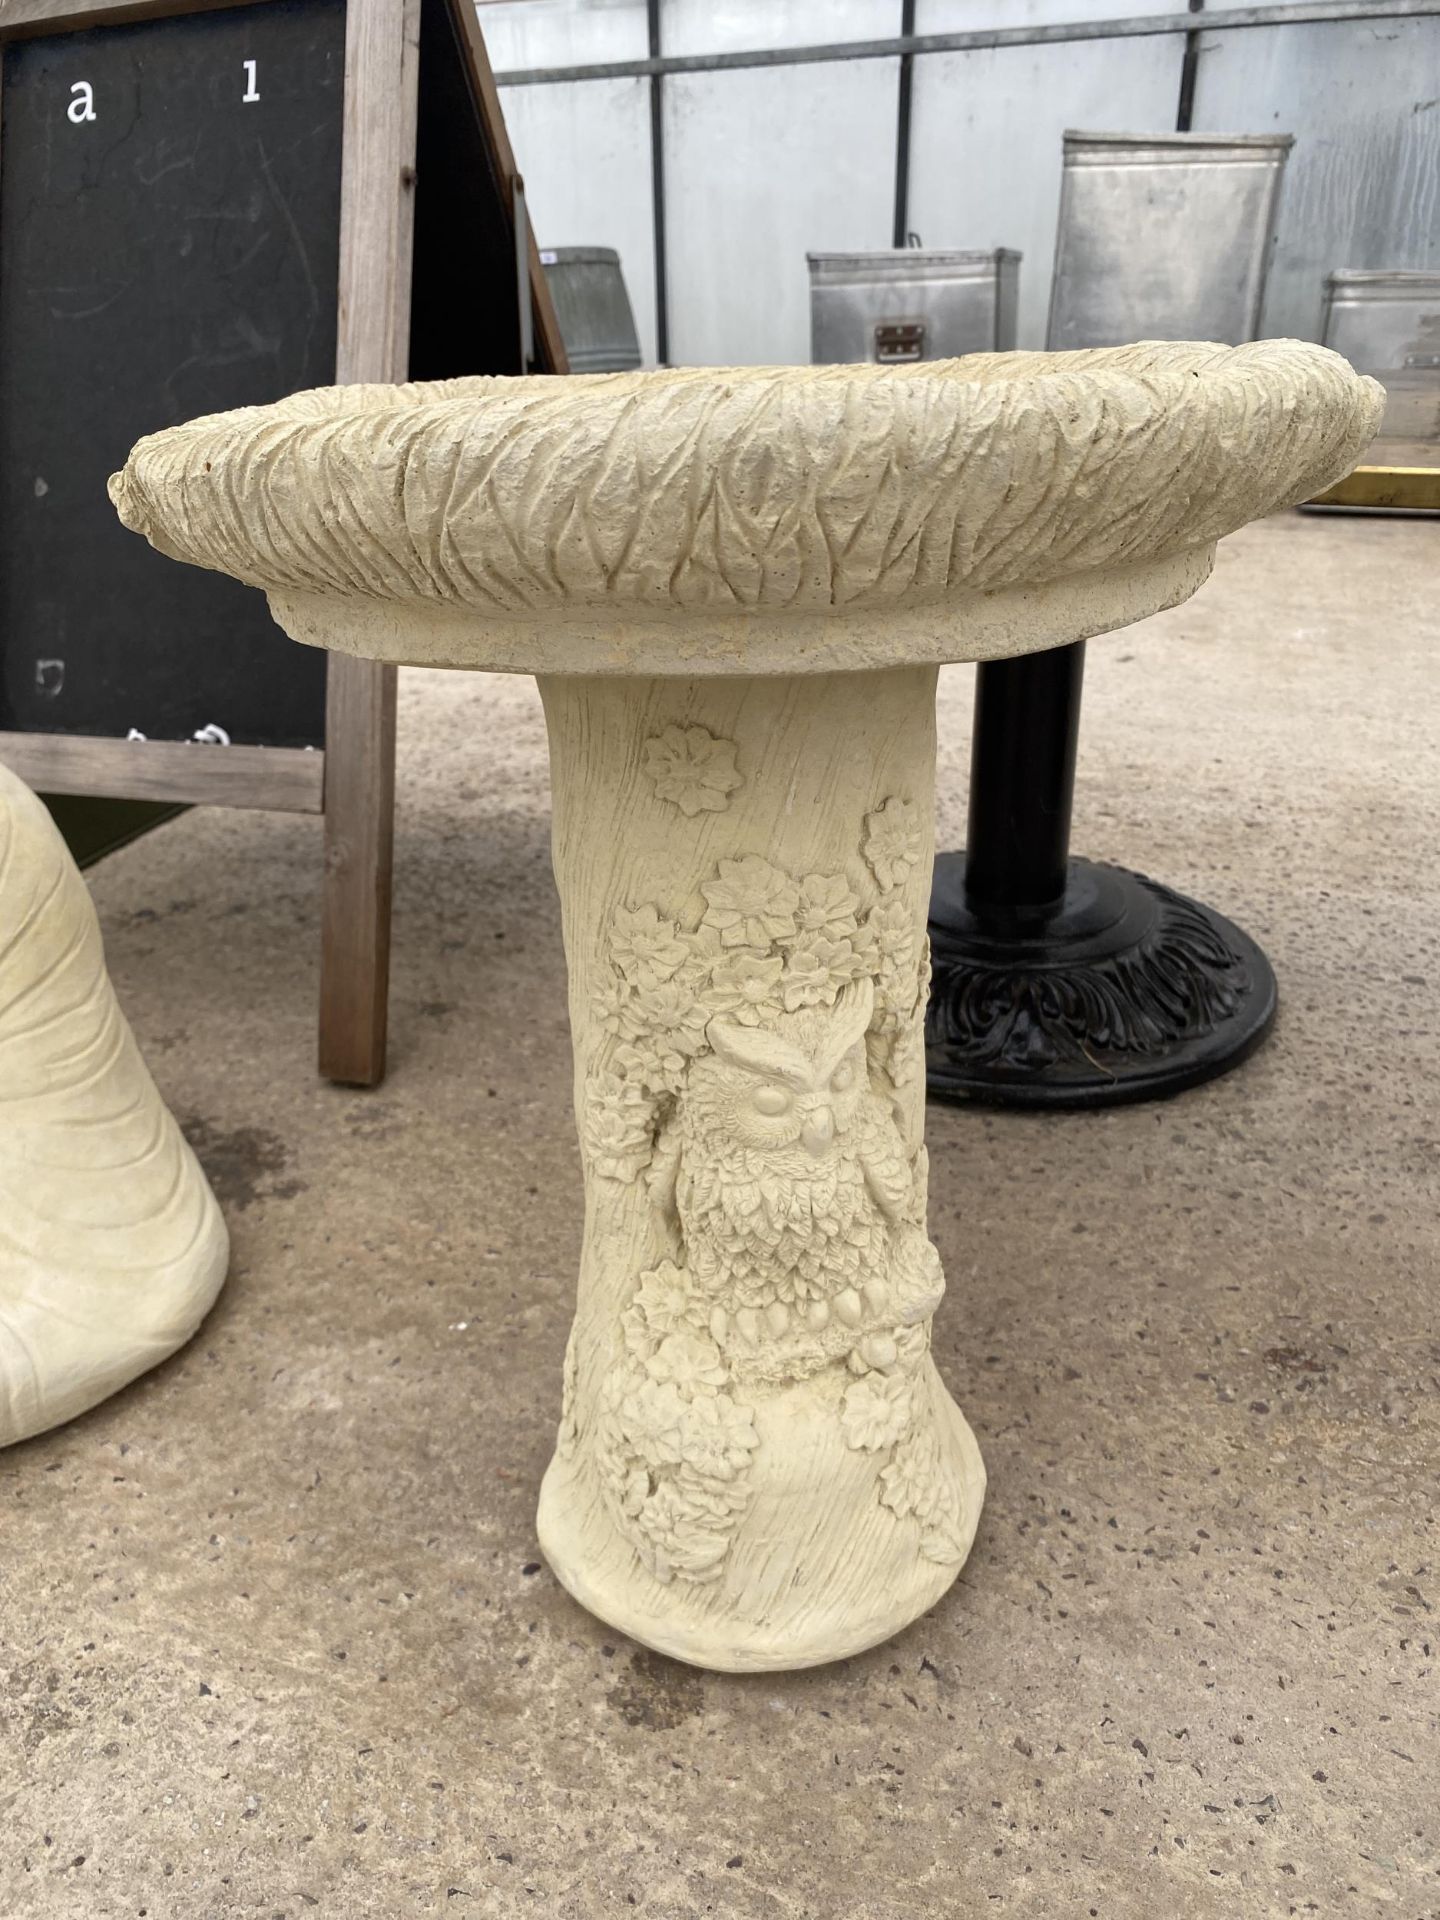 AN AS NEW EX DISPLAY CONCRETE 'OWL BIRDBATH' *PLEASE NOTE VAT TO BE PAID ON THIS ITEM*